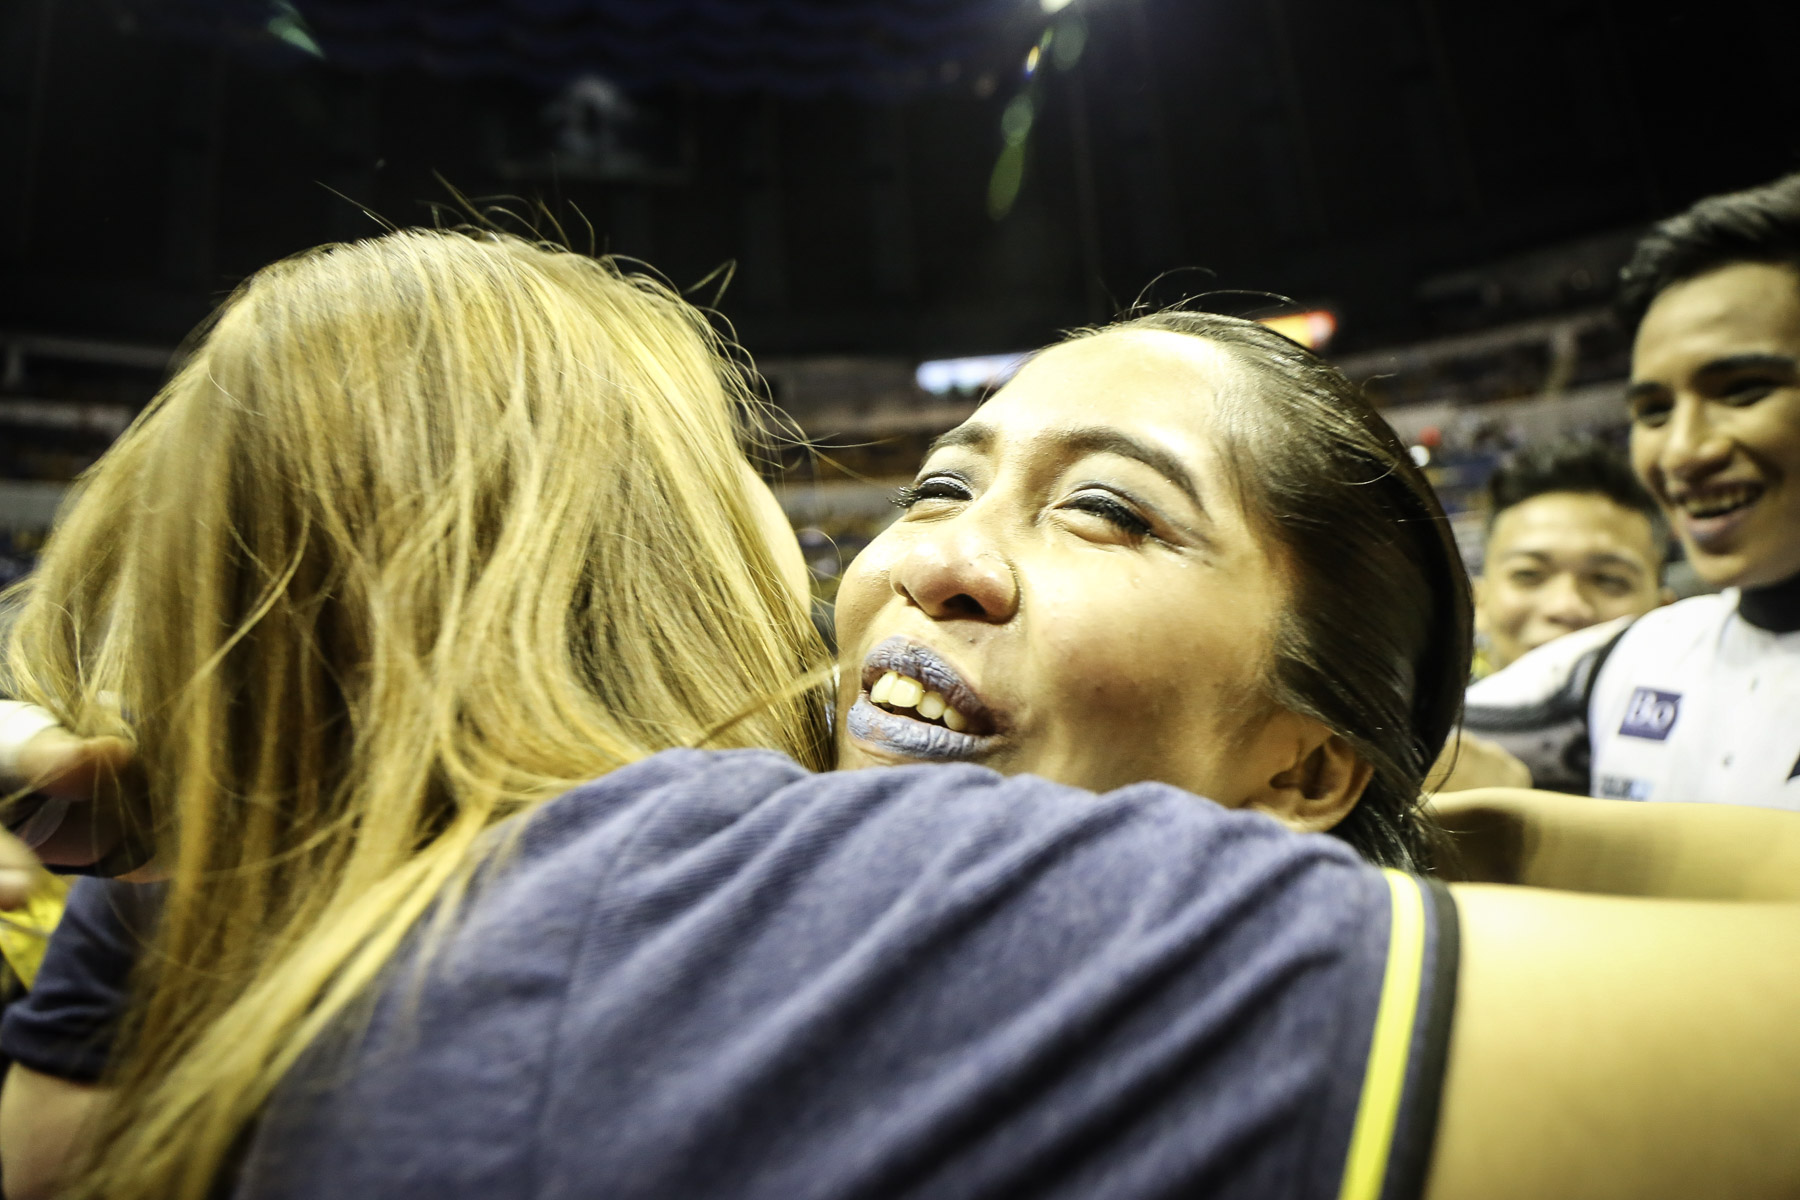 EMOTION. The thrill of victory is apparent. Photo by Josh Albelda/Rappler 